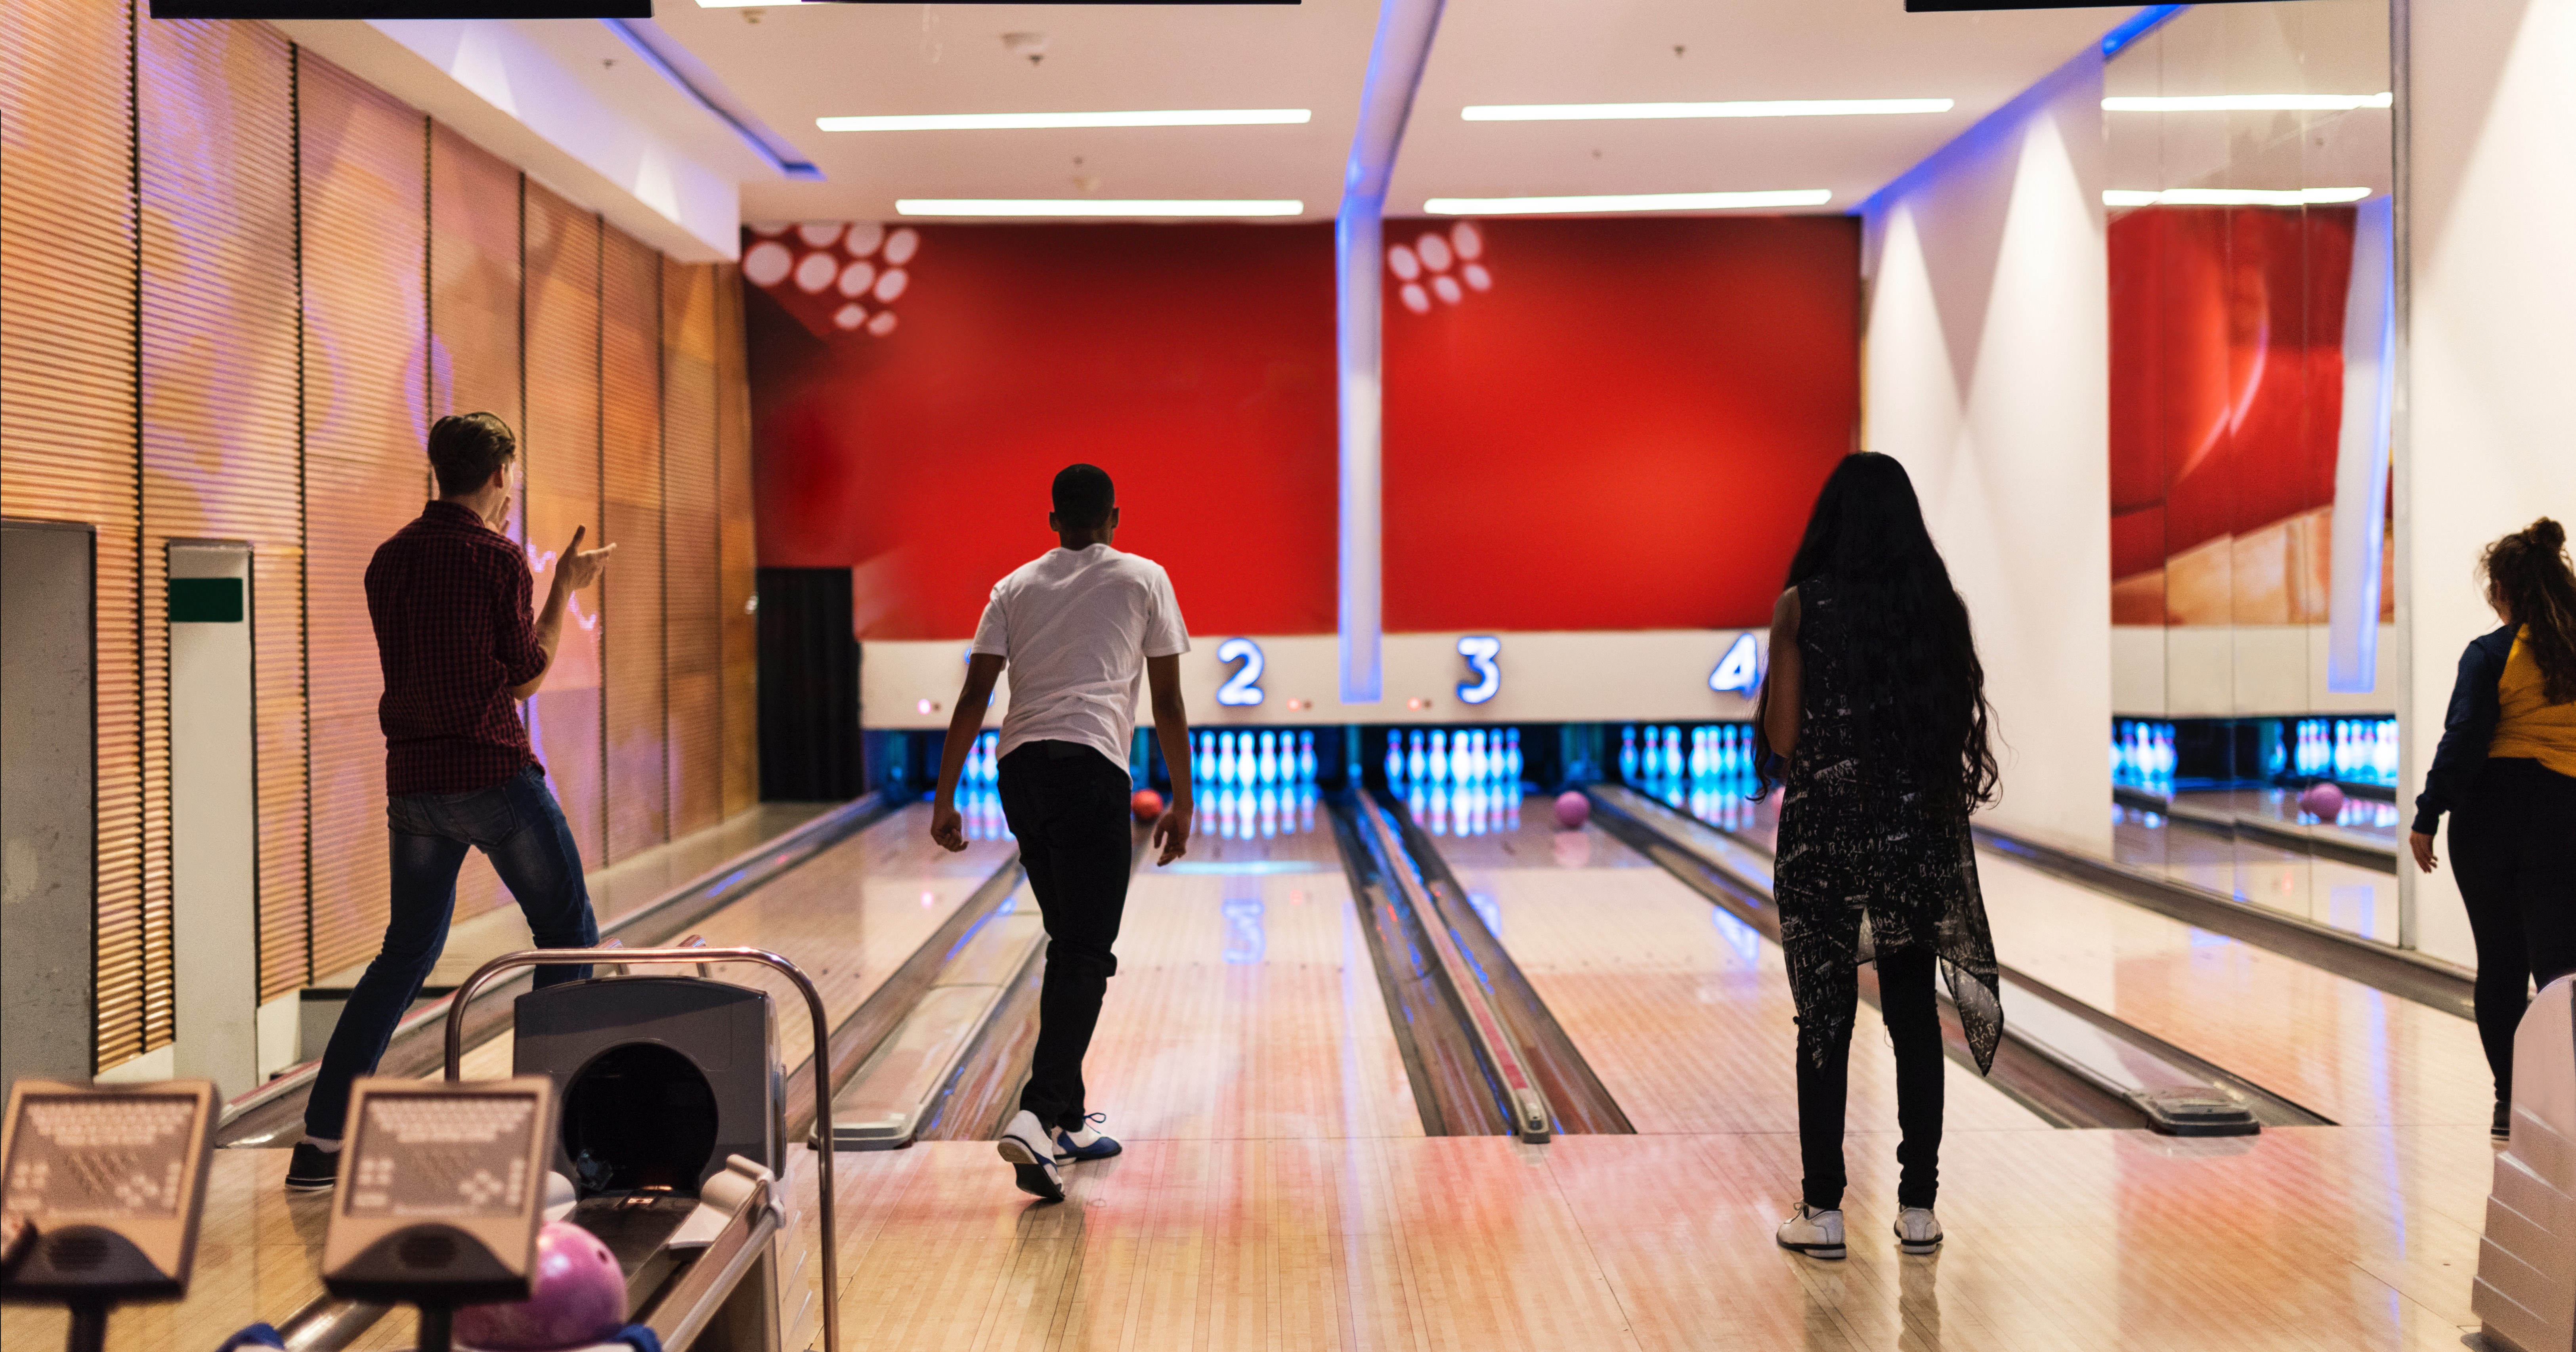 Image of people at a bowling alley.